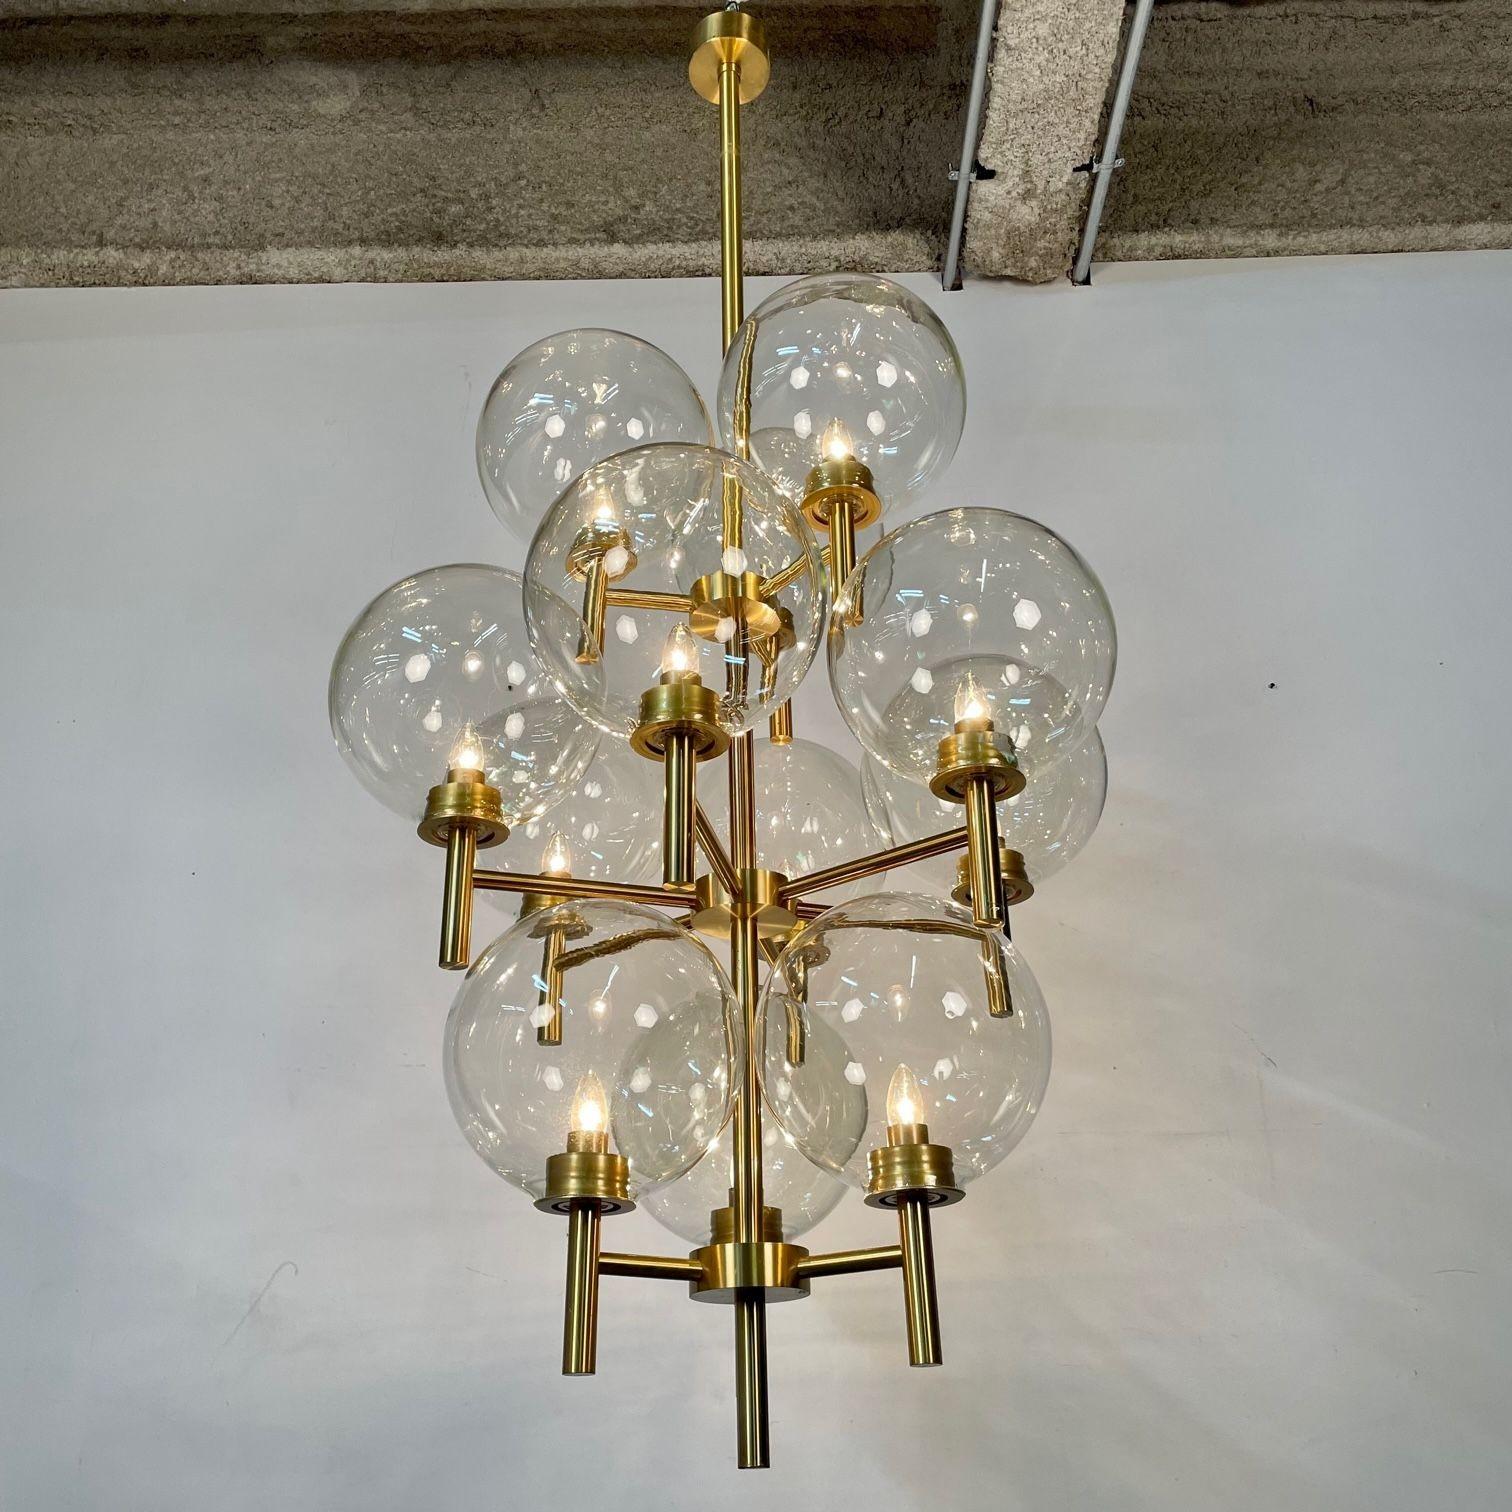 Pair of Monumental Mid-Century Modern Style Chandeliers in Amber Glass and Brass For Sale 1